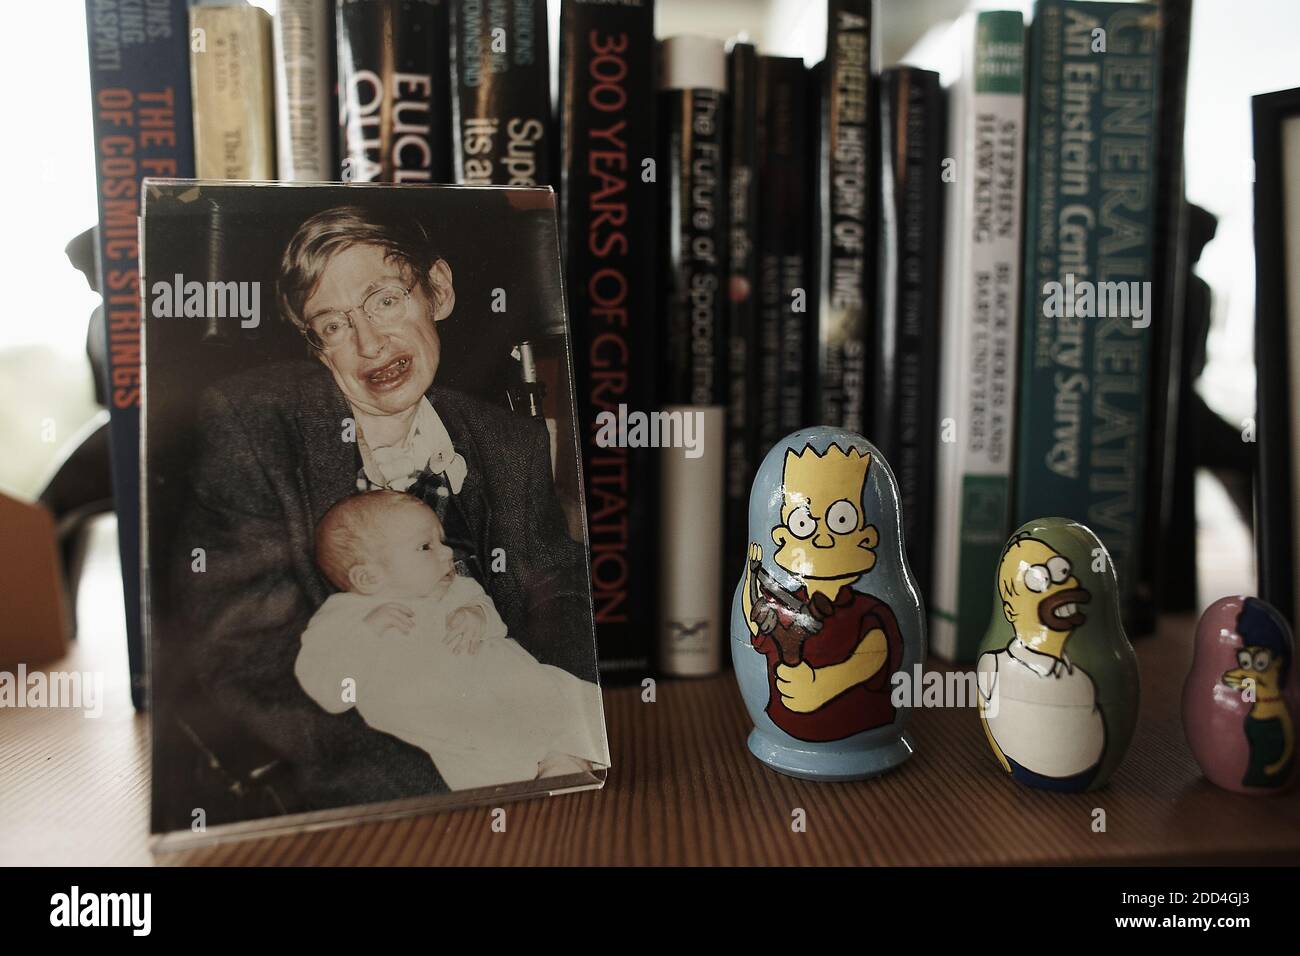 GREAT BRITAIN /Cambridge/Prof. Stephen Hawking's displaying photo of holding his baby daughter with toys ot the Simpsons in his office at Cambridge University Stock Photo